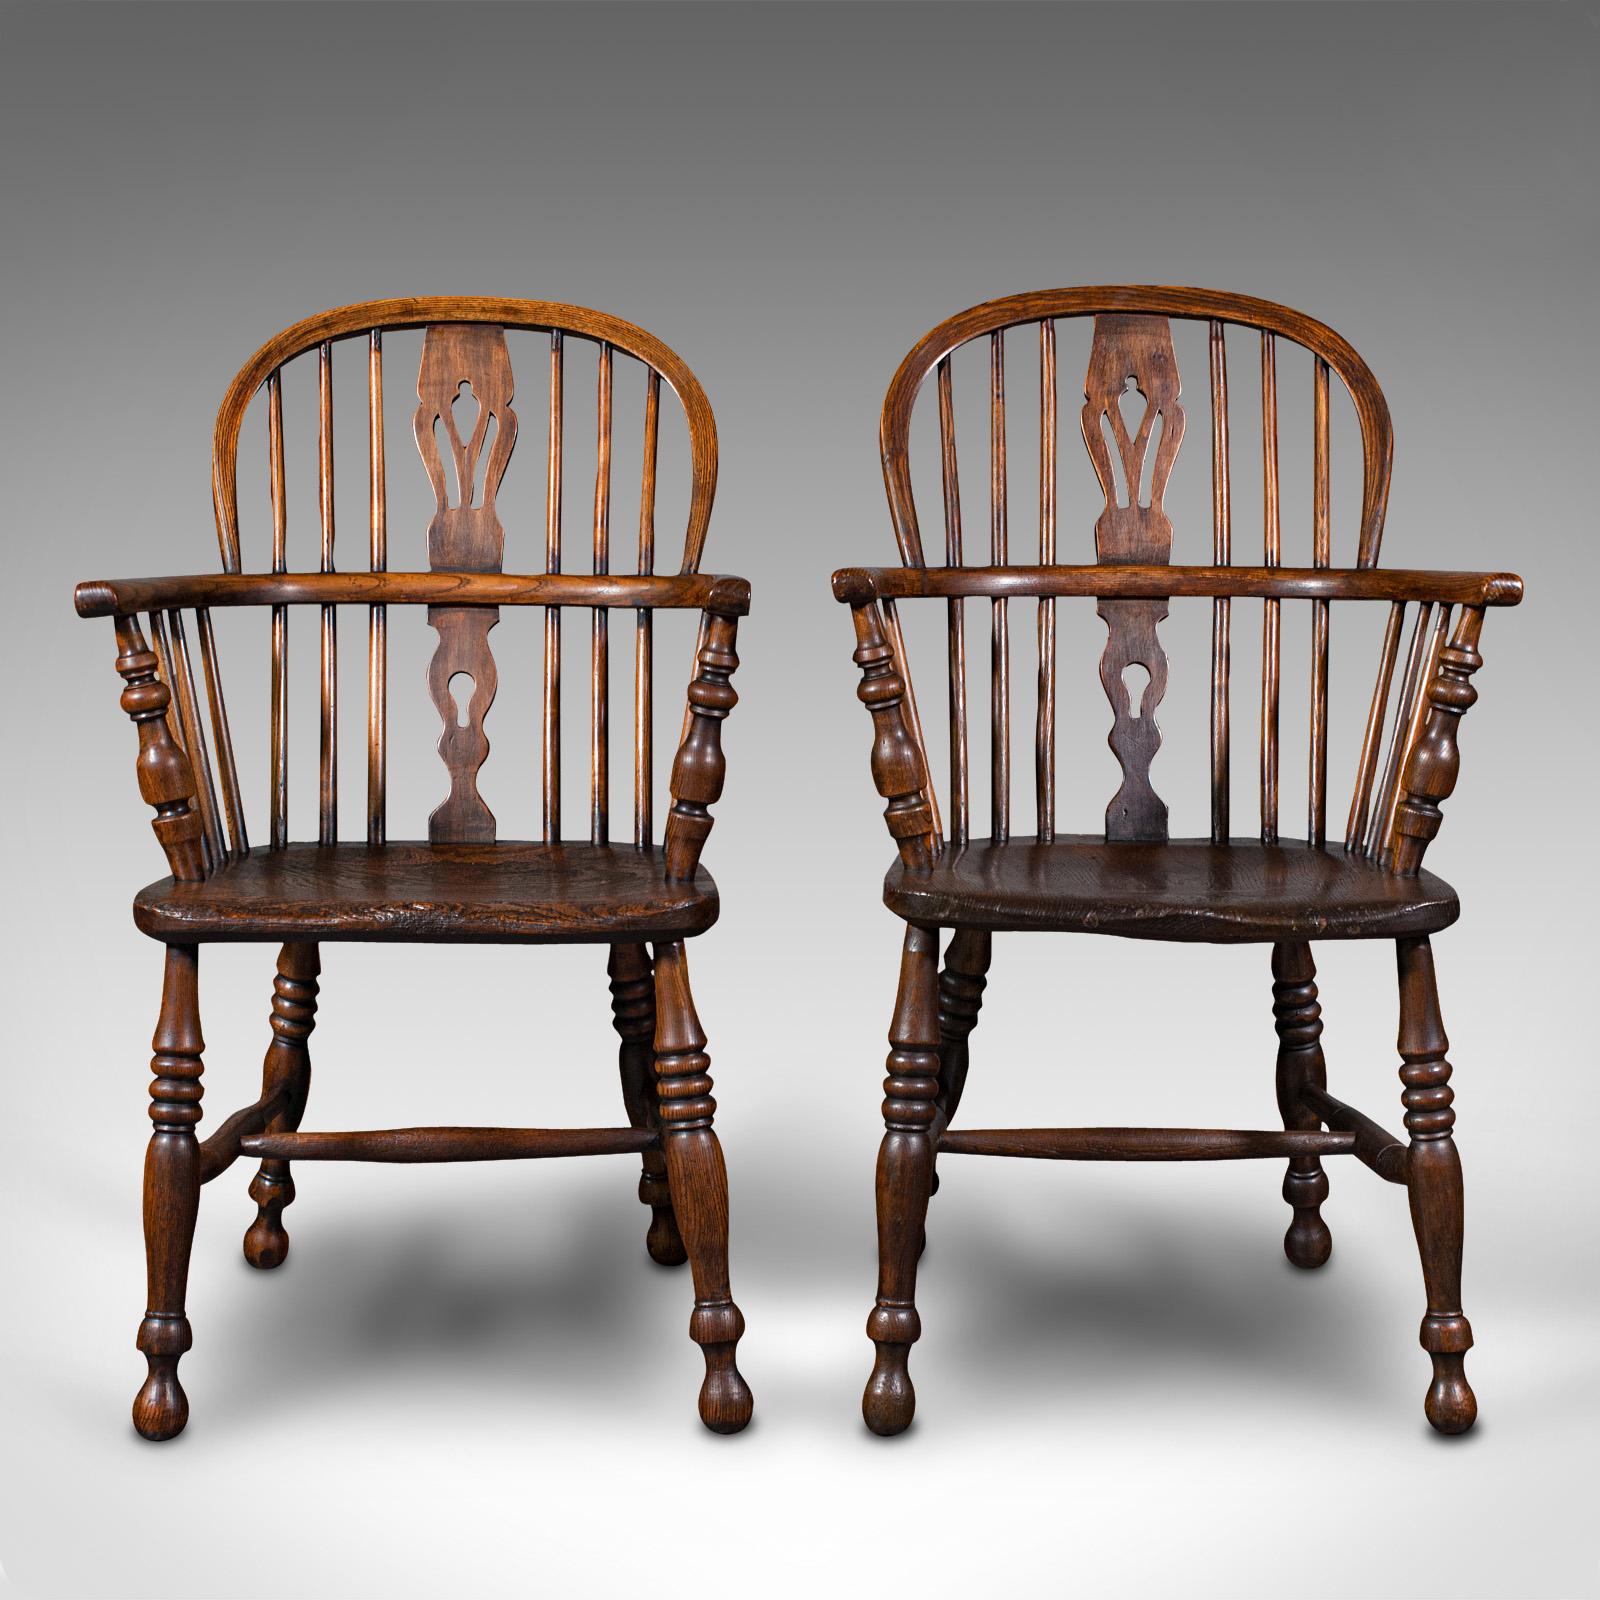 This is a pair of antique Windsor chairs. An English, elm and ash elbow or armchair, dating to the mid Victorian period, circa 1850.

Country house appeal, inviting to be placed at the fireside
Displaying a desirable aged patina and in good